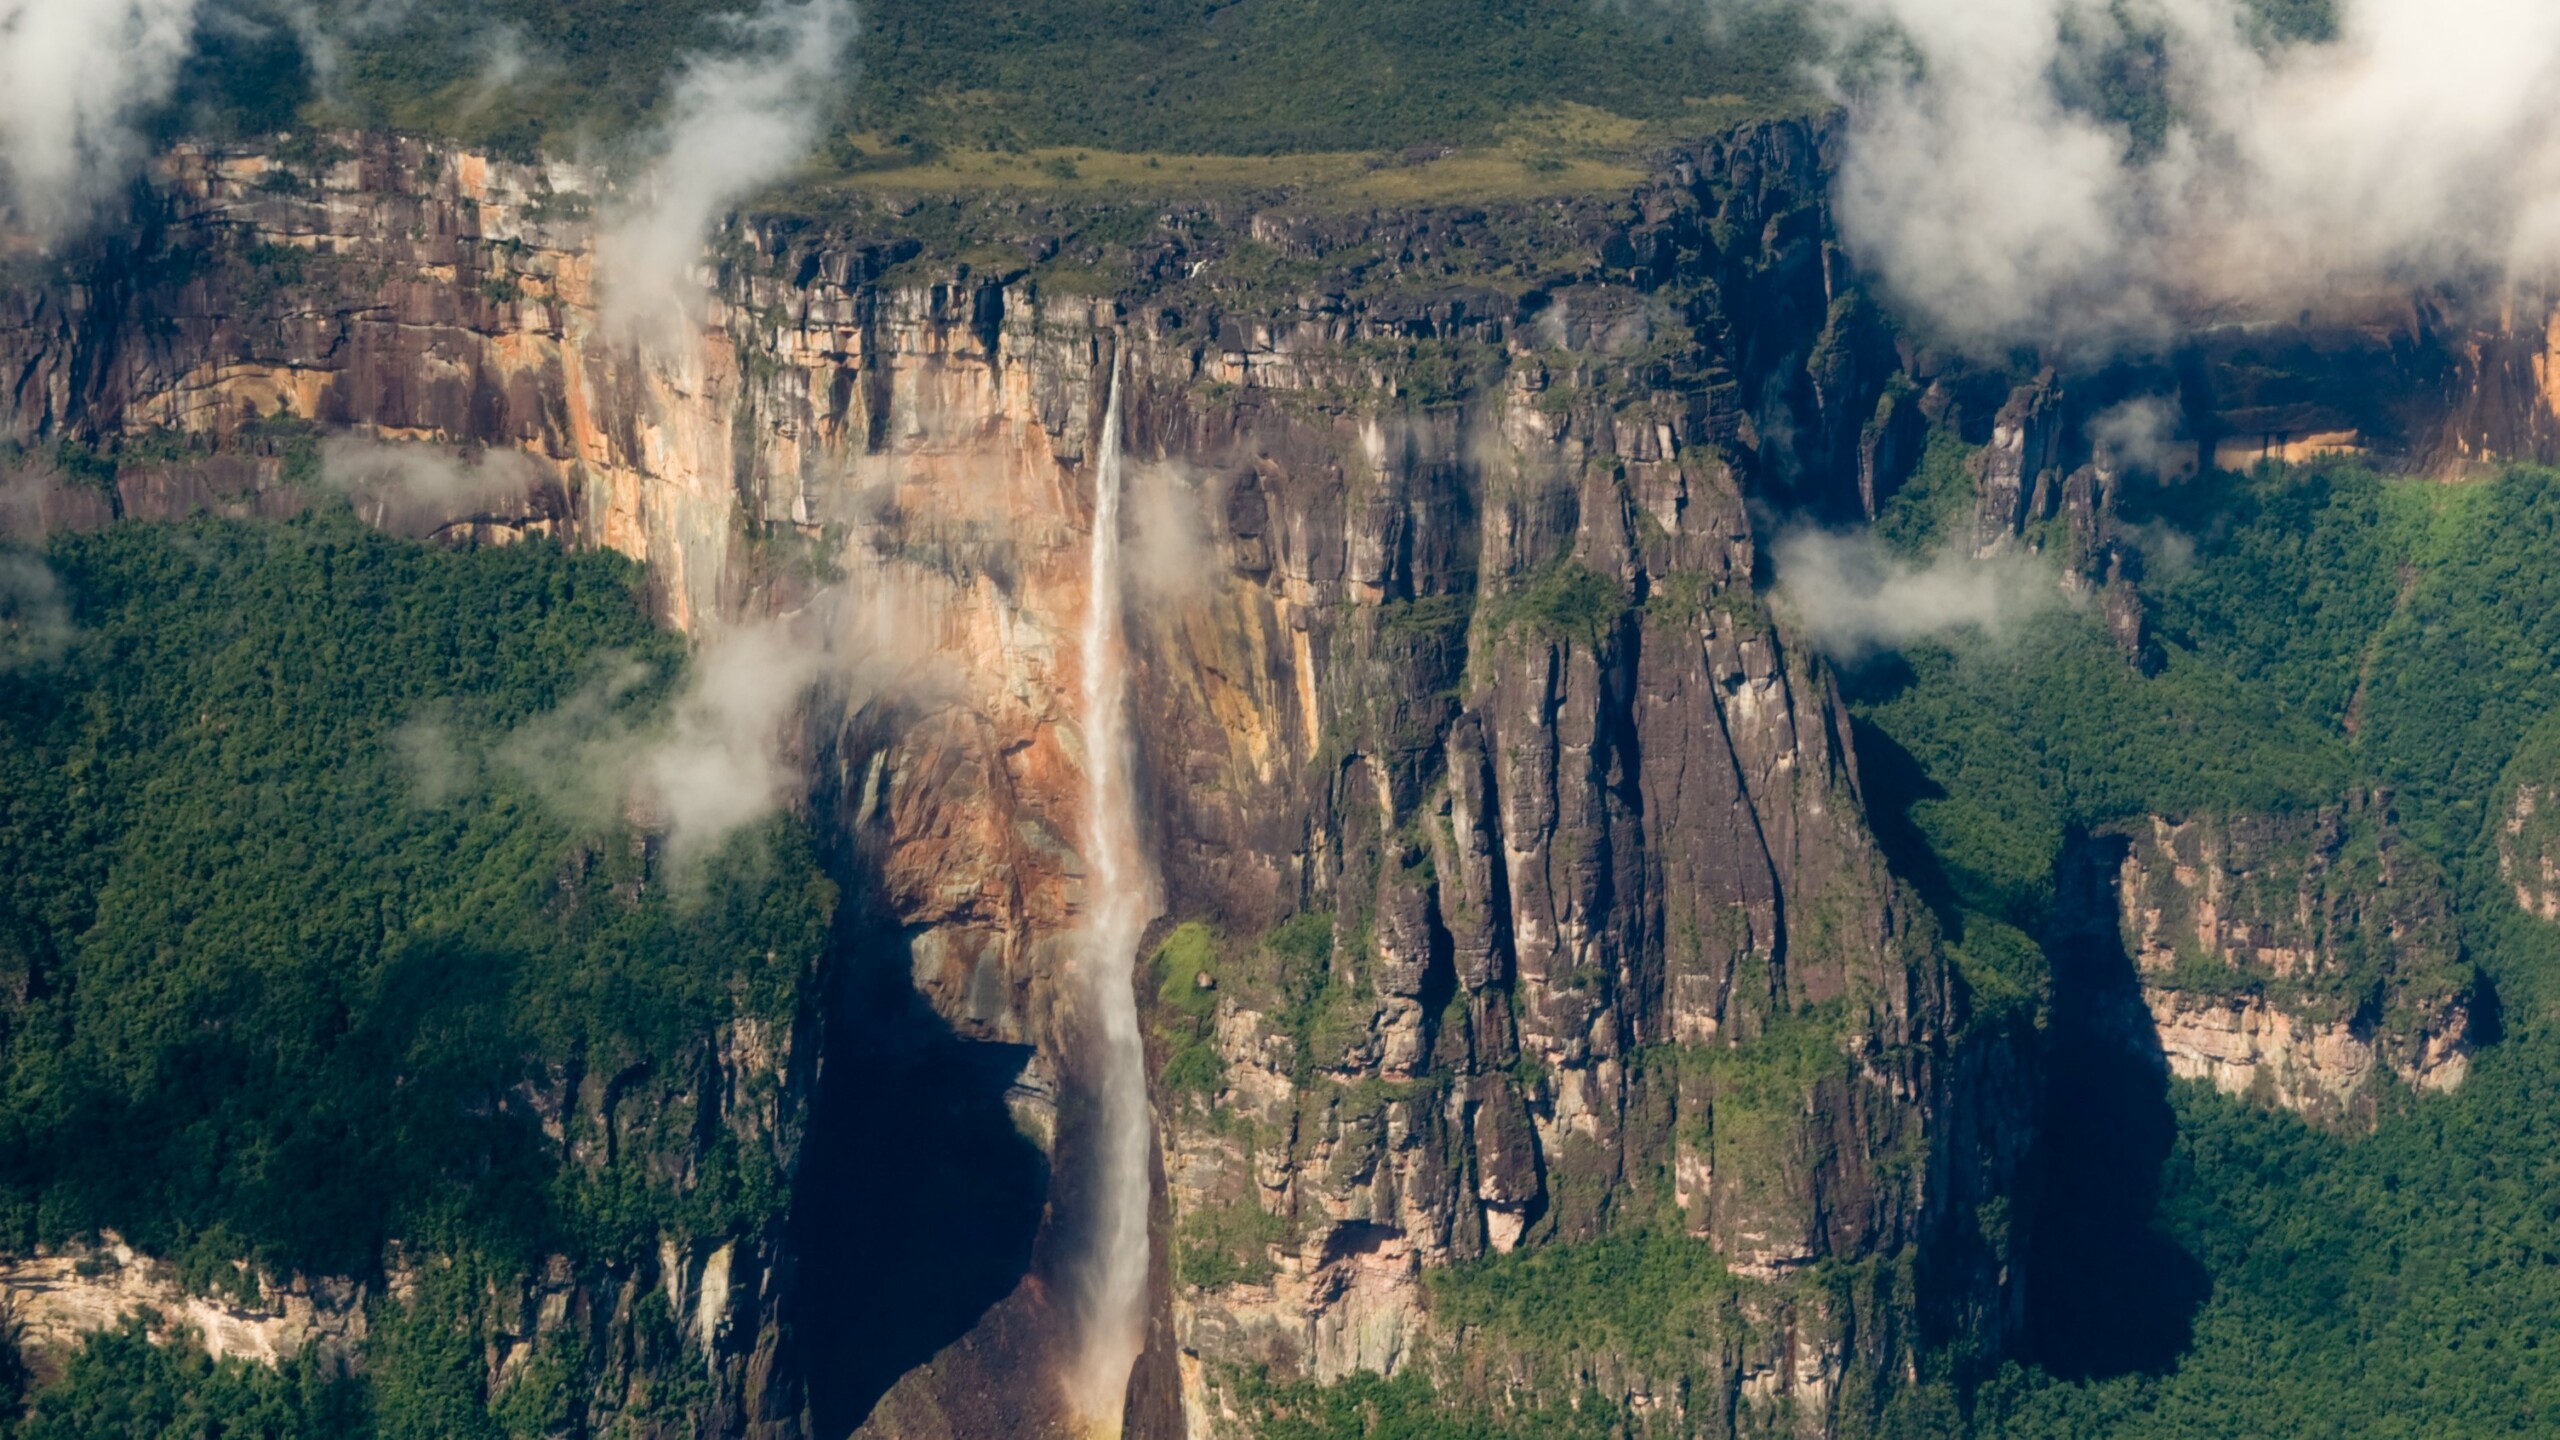 What’s the largest waterfall in the world?